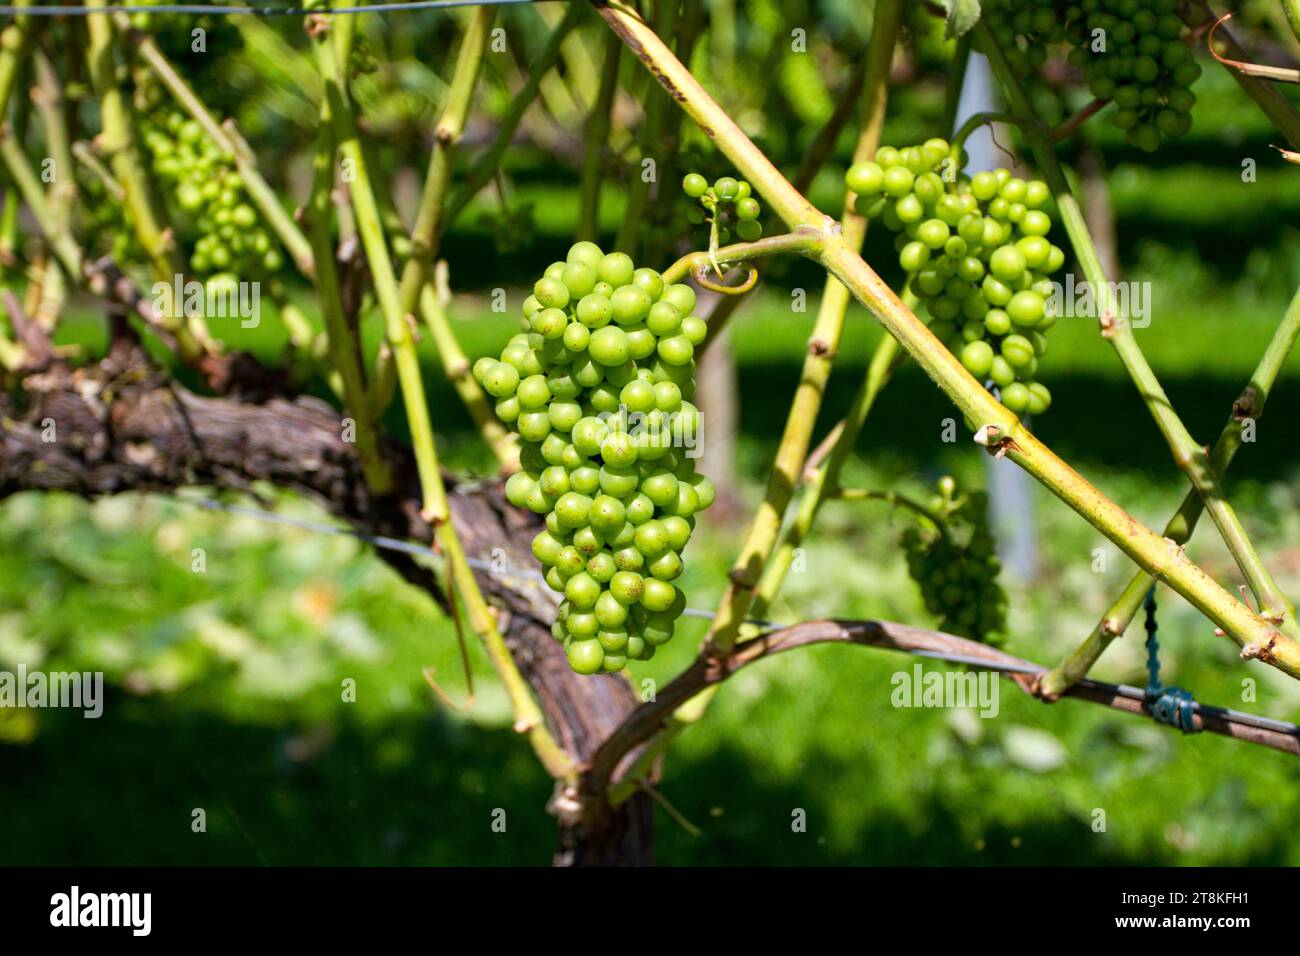 Bunches of green grapes for wine-making on a vine in Somerset, England, GB Stock Photo